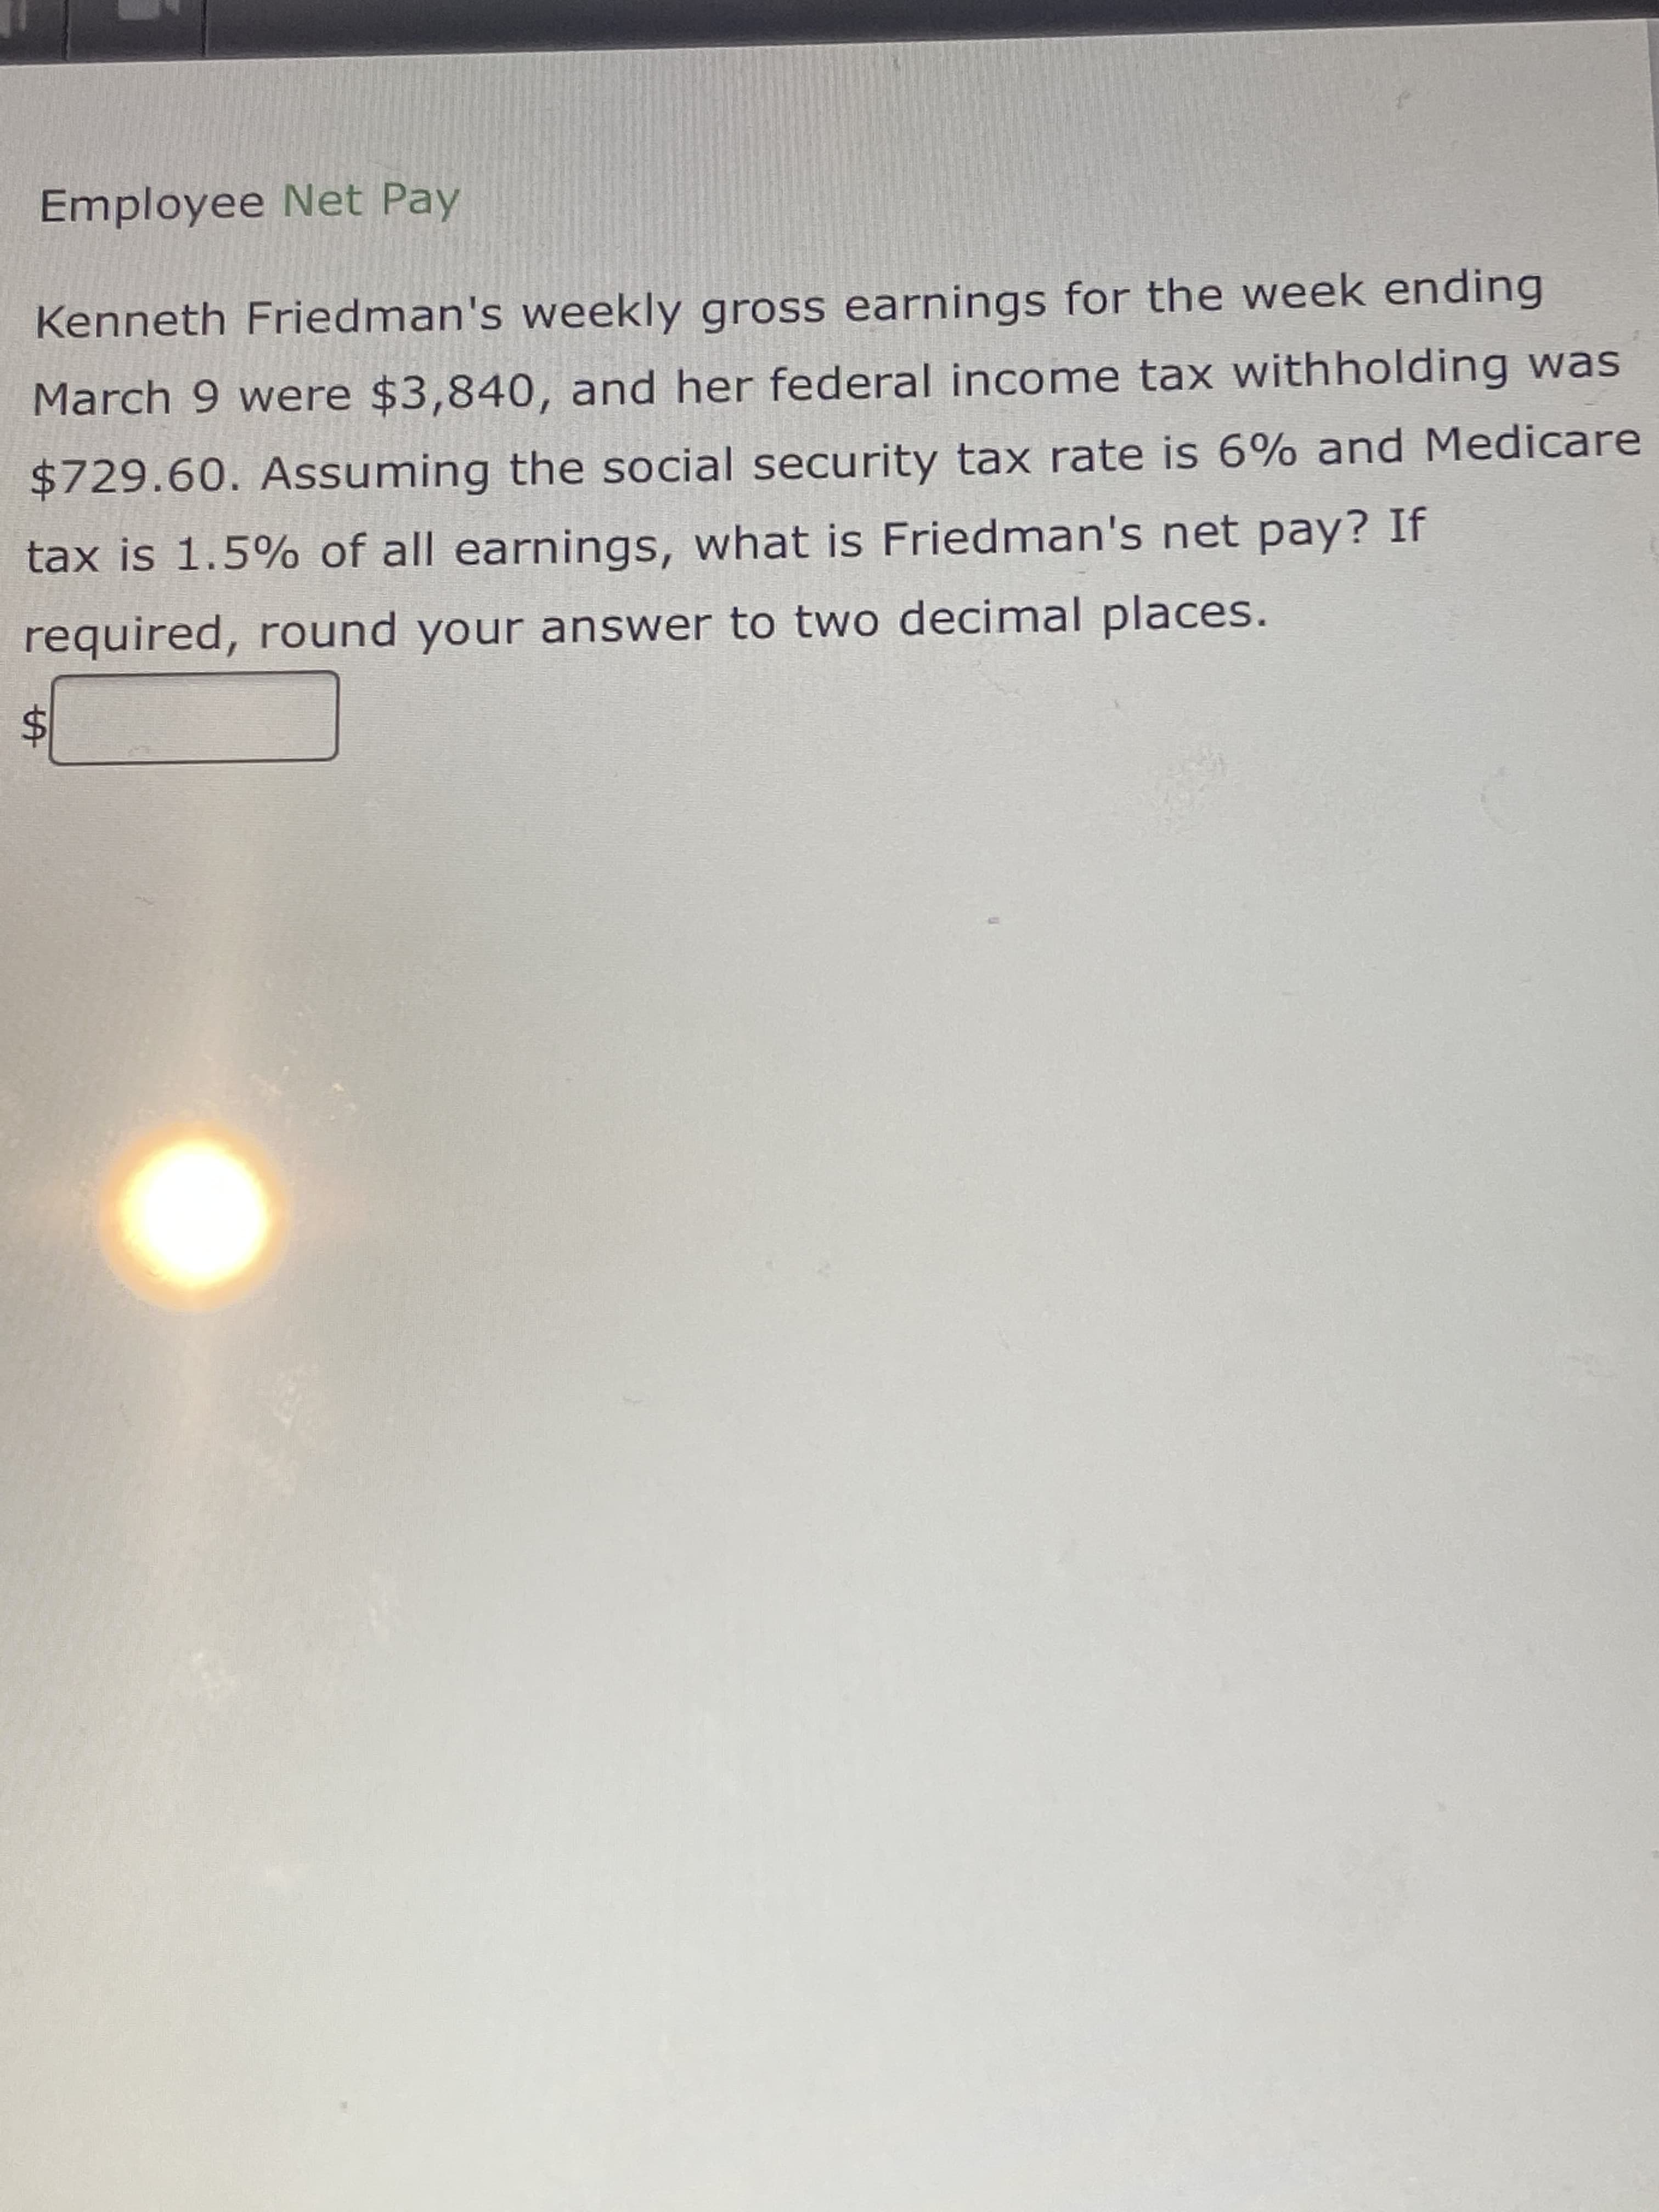 %24
Employee Net Pay
Kenneth Friedman's weekly gross earnings for the week ending
March 9 were $3,840, and her federal income tax withholding was
$729.60. Assuming the social security tax rate is 6% and Medicare
tax is 1.5% of all earnings, what is Friedman's net pay? If
required, round your answer to two decimal places.
